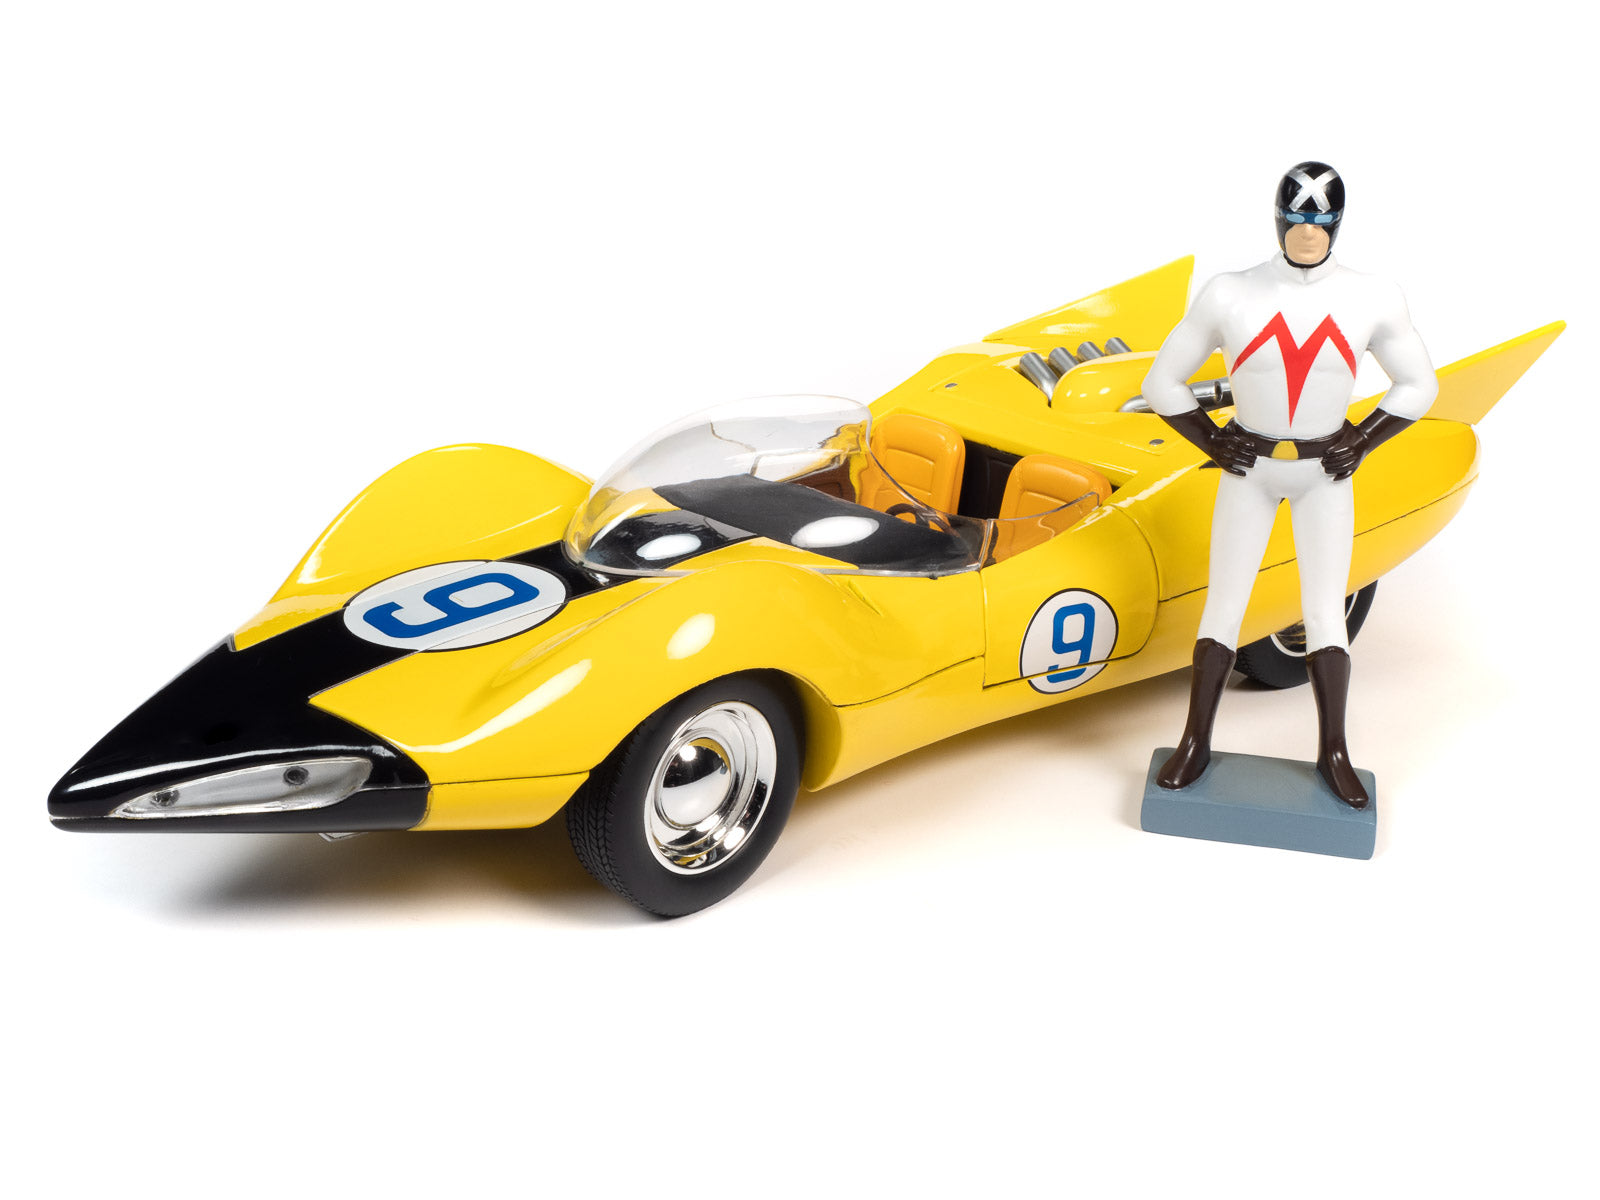 Auto World Speed Racer Shooting Star with Racer X Figure 1:18